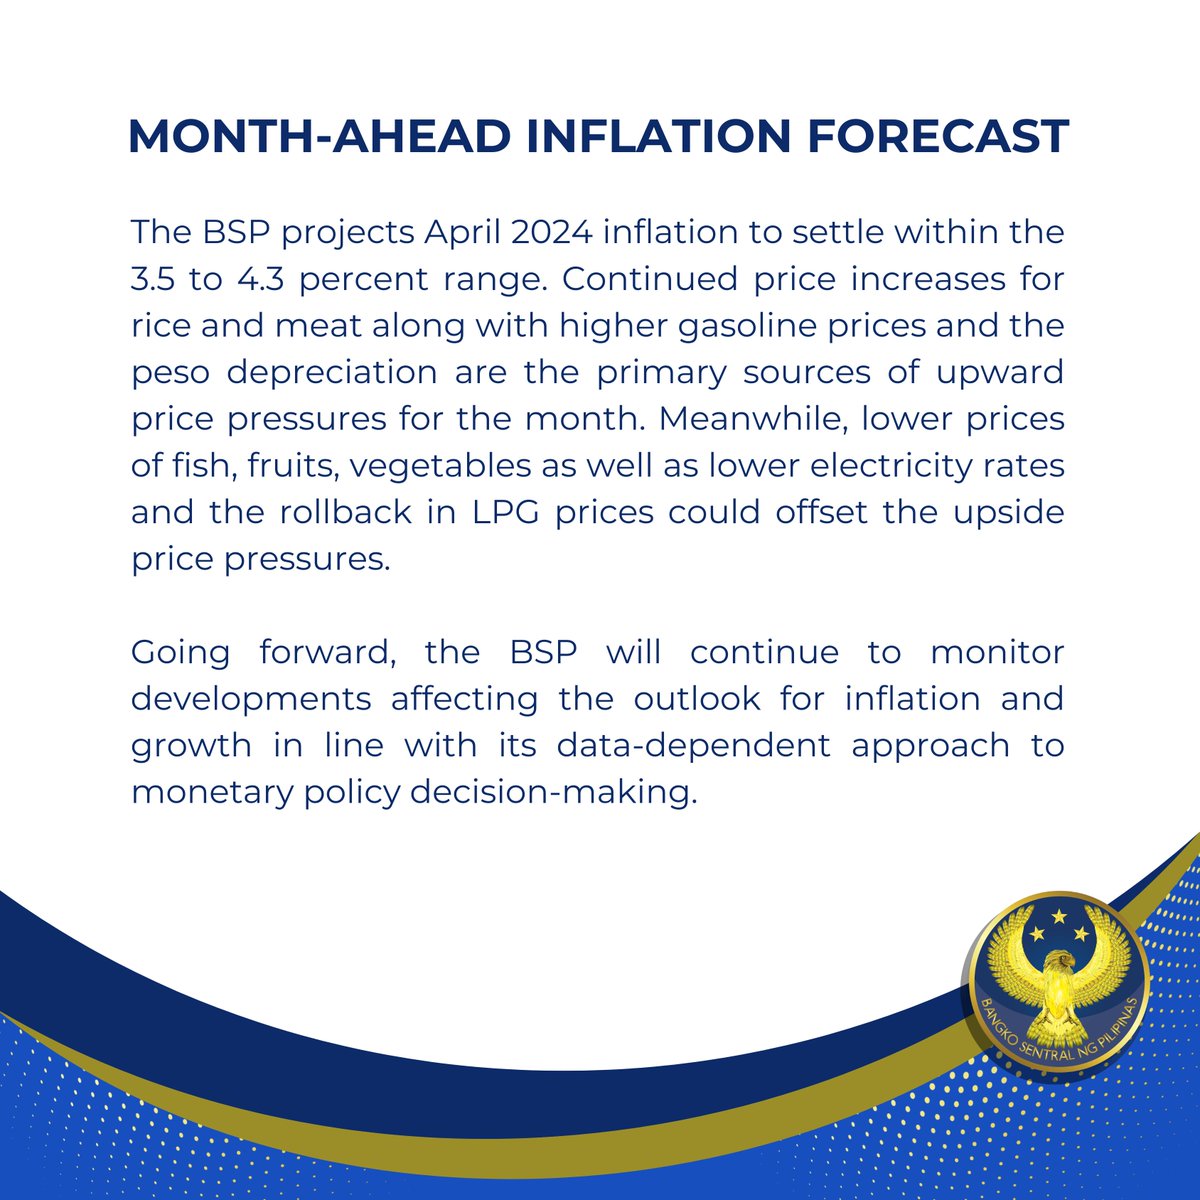 Month-Ahead Inflation Forecast for April 2024 #BSP #BSPUpdates #Inflation